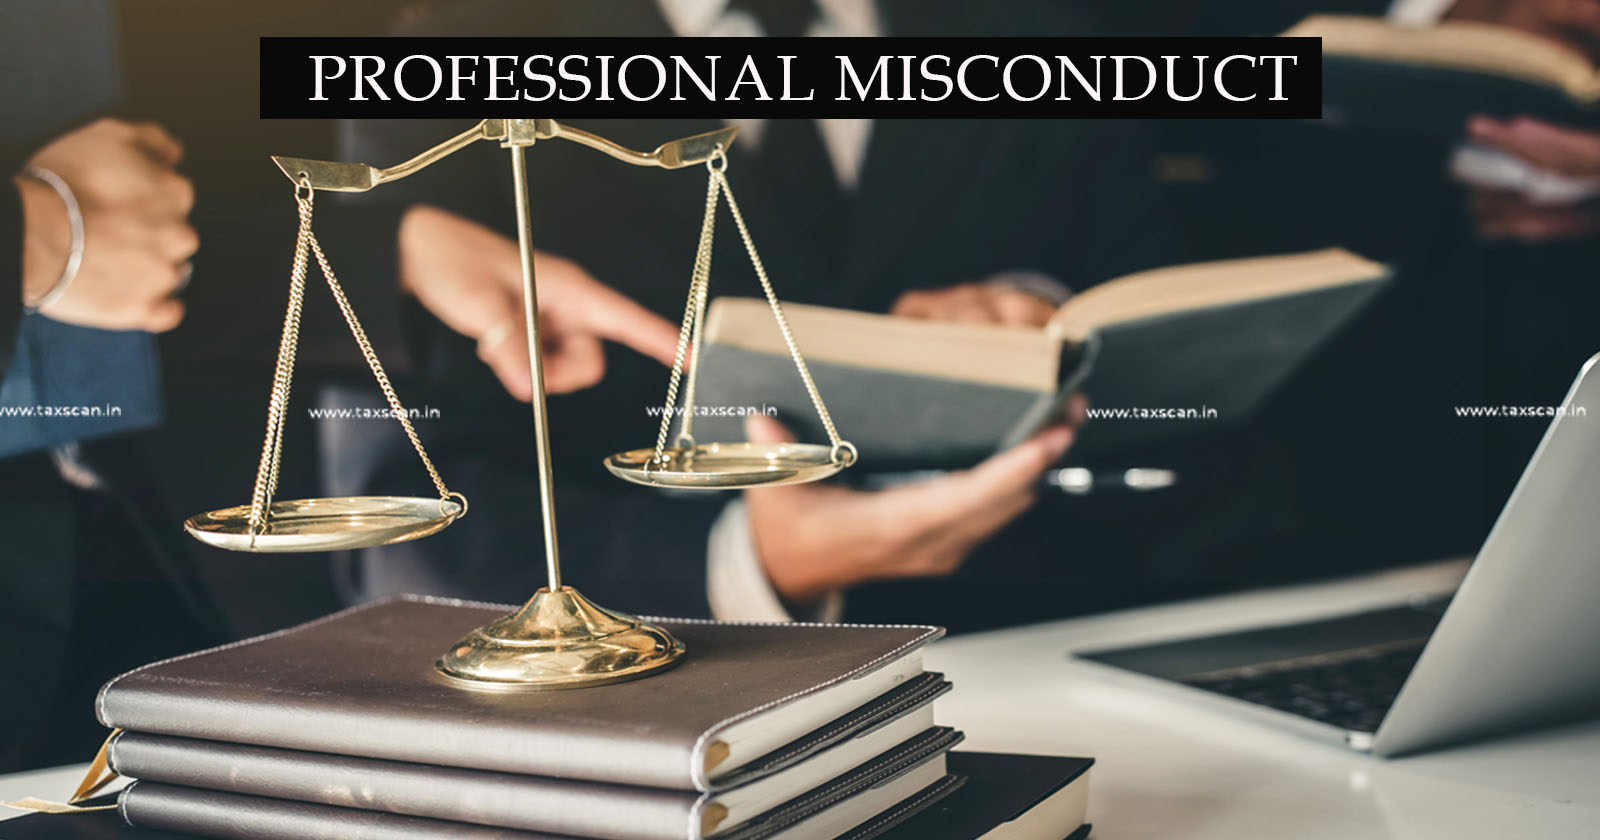 CA Acting as Statutory Auditor Guilty of Professional Misconduct in - Detecting Wrong Financial Statement in Audit Report - ICAI - TAXSCAN